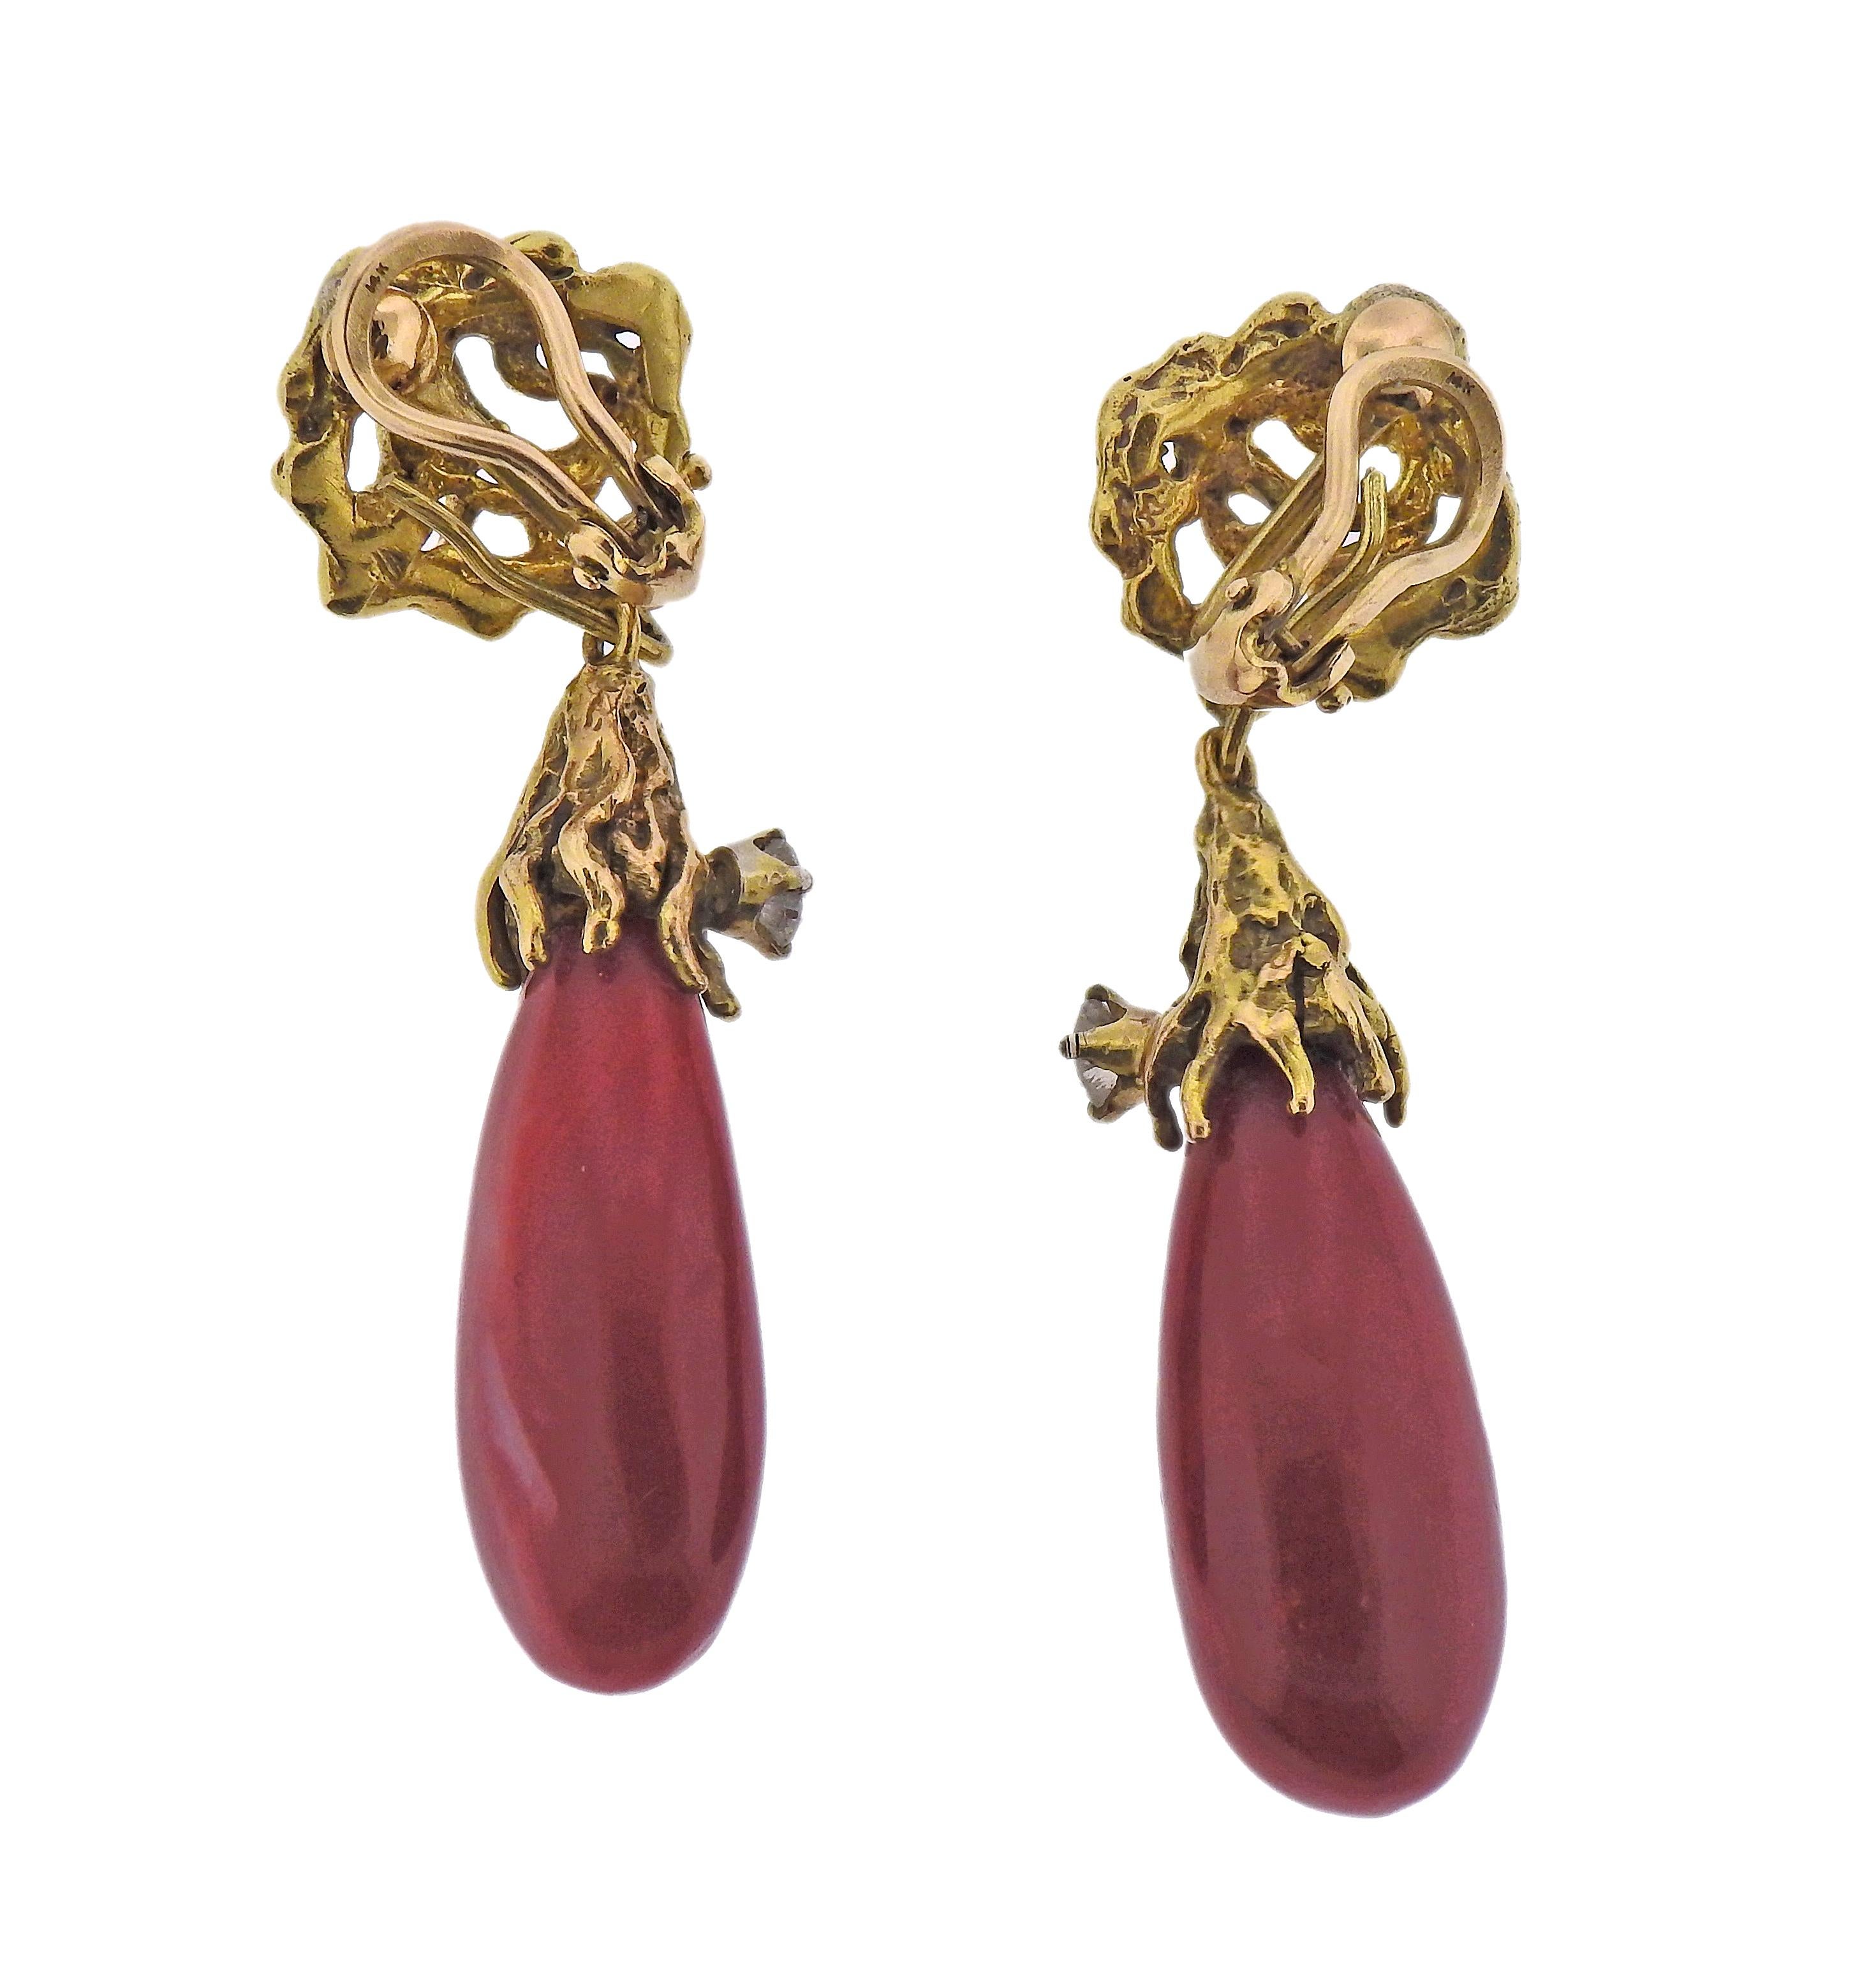 Pair of 1970s 14k gold drop earrings, with removable coral drops and approx. 0.46ctw in diamonds. Earrings are 2 1/8